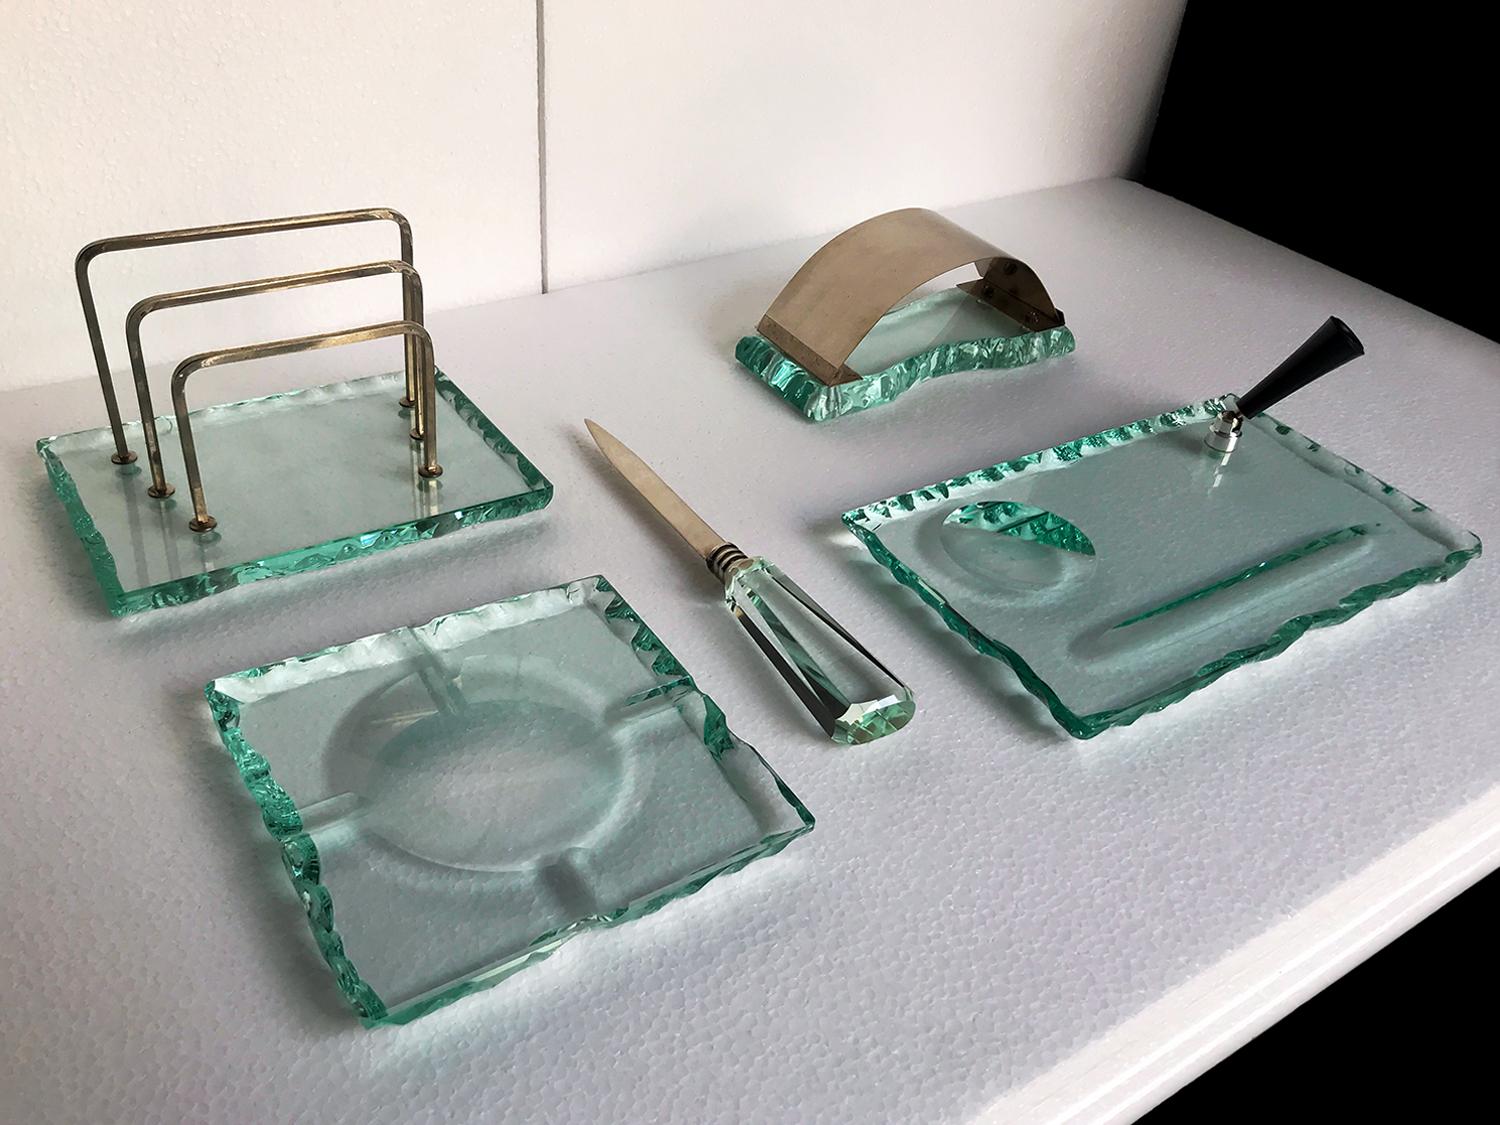 Stunning crystal desk set produced by Fontana Arte in the 1950s and attributable to the design of Pietro Chiesa.
All items are handmade and chiseled using thick glass colored 'green Nilo', characteristic of the production of glassware manufactured